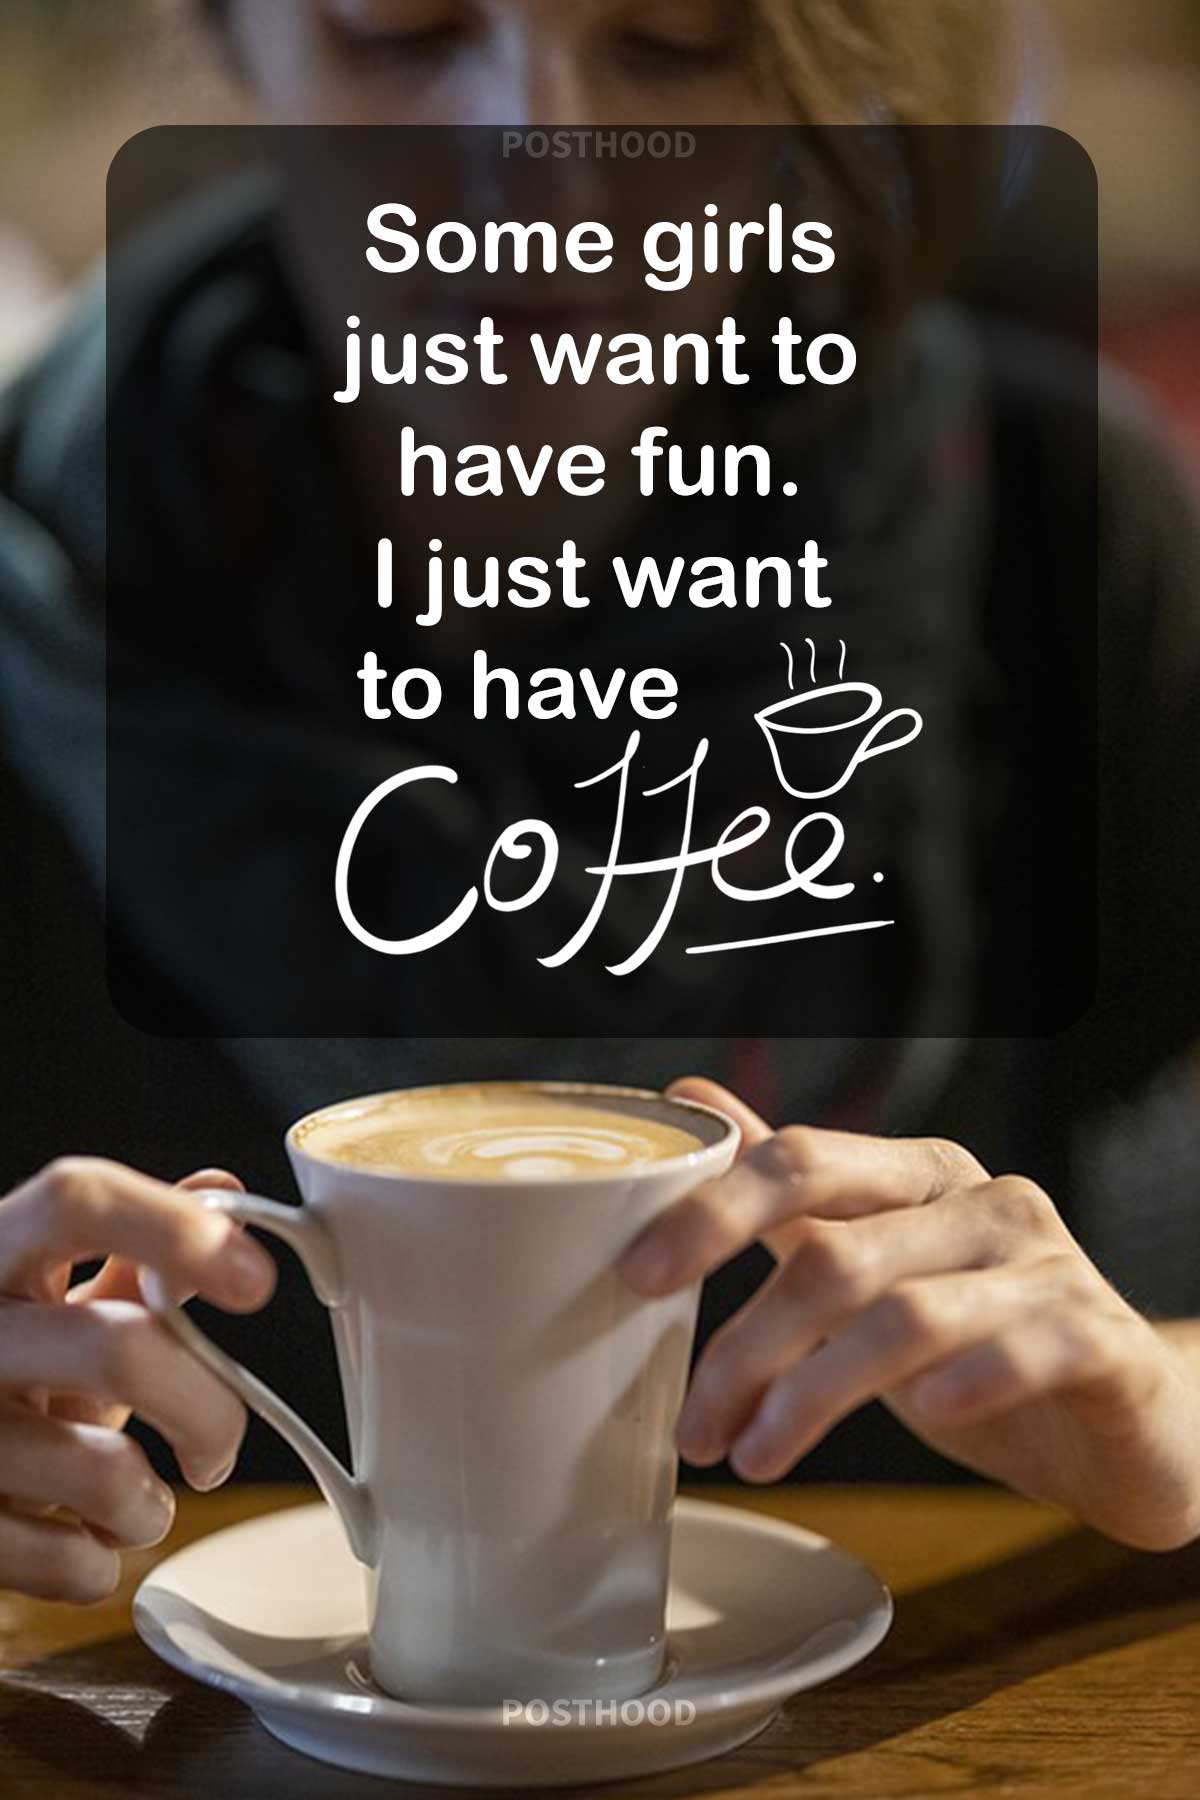 80 great coffee quotes for her. This caffeine-related humor is a perfect way to strengthen your bond with your friends and family.